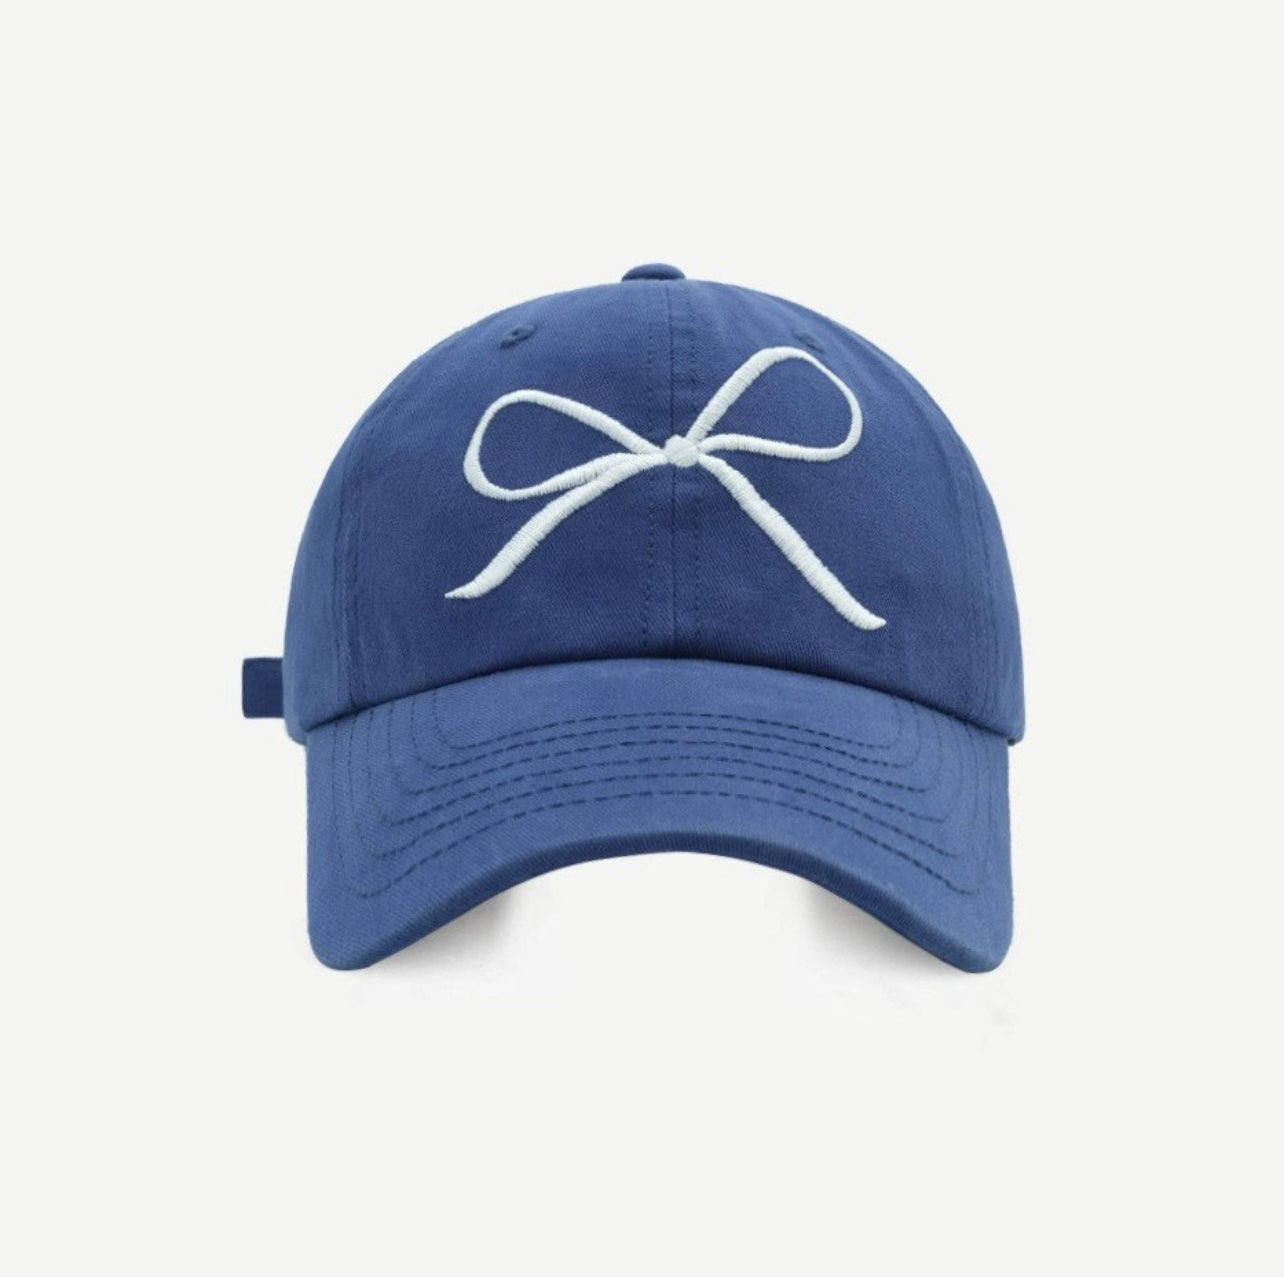 Blue Embroidered Bow Cap